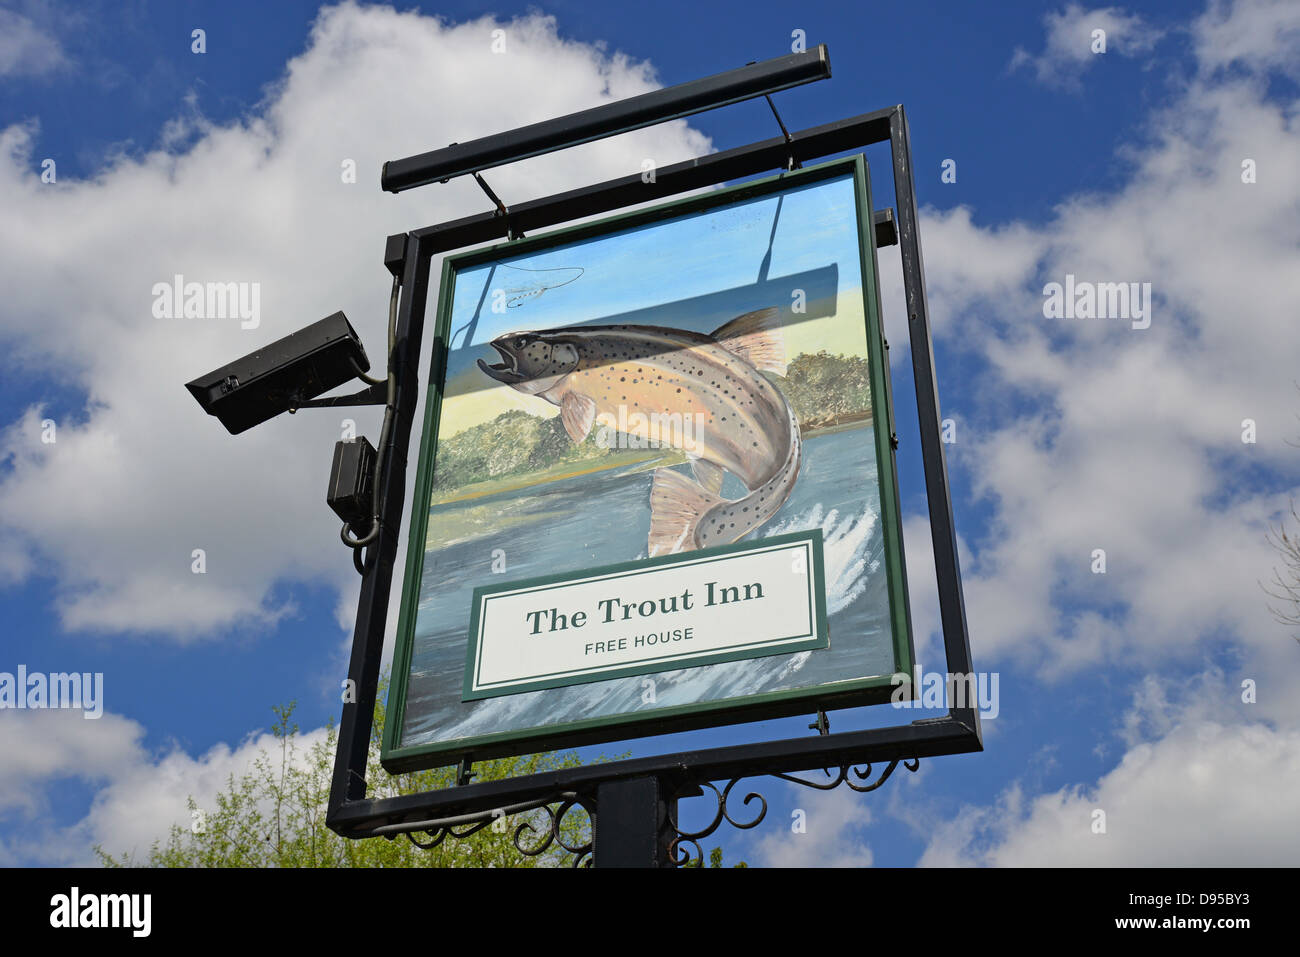 'The Trout Inn' sign, Lower Wolvercote, Oxford, Oxfordshire, England, United Kingdom Stock Photo